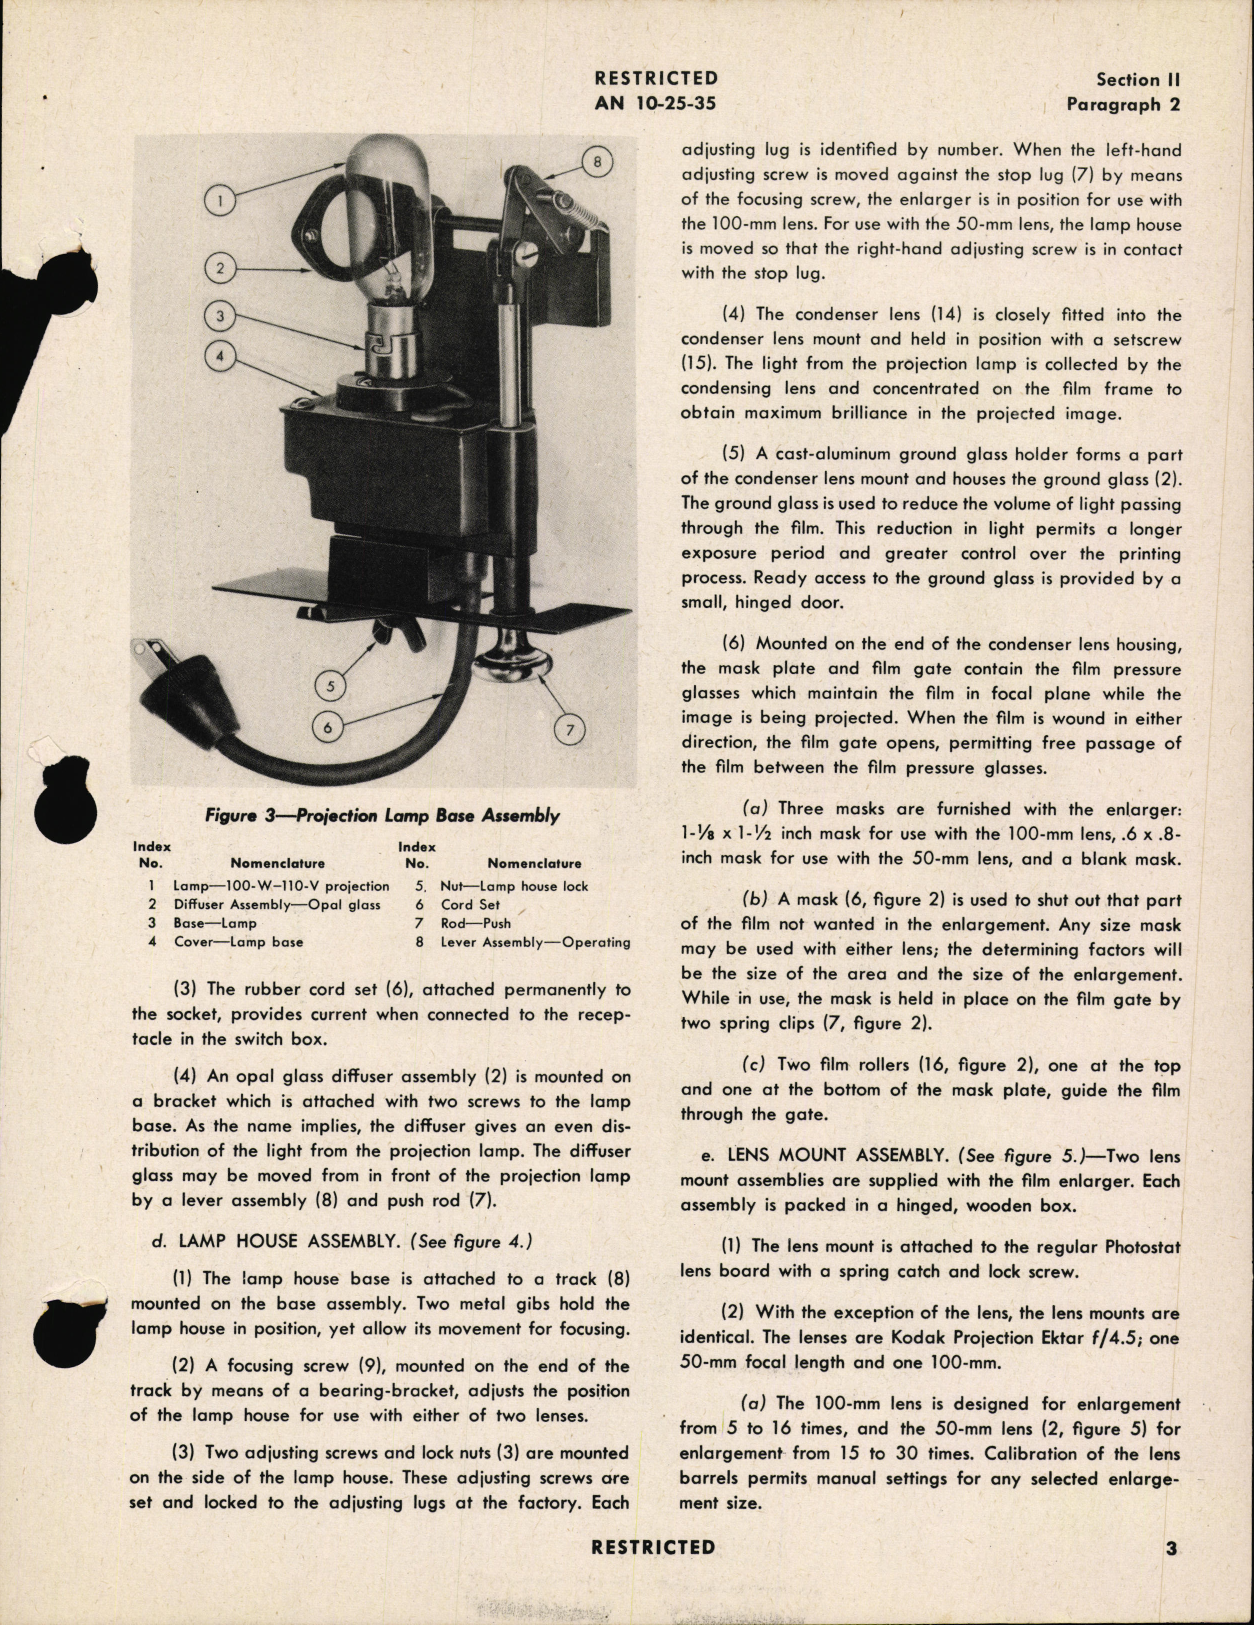 Sample page 7 from AirCorps Library document: Handbook of Instructions with Parts Catalog for Photostat Film Enlarger